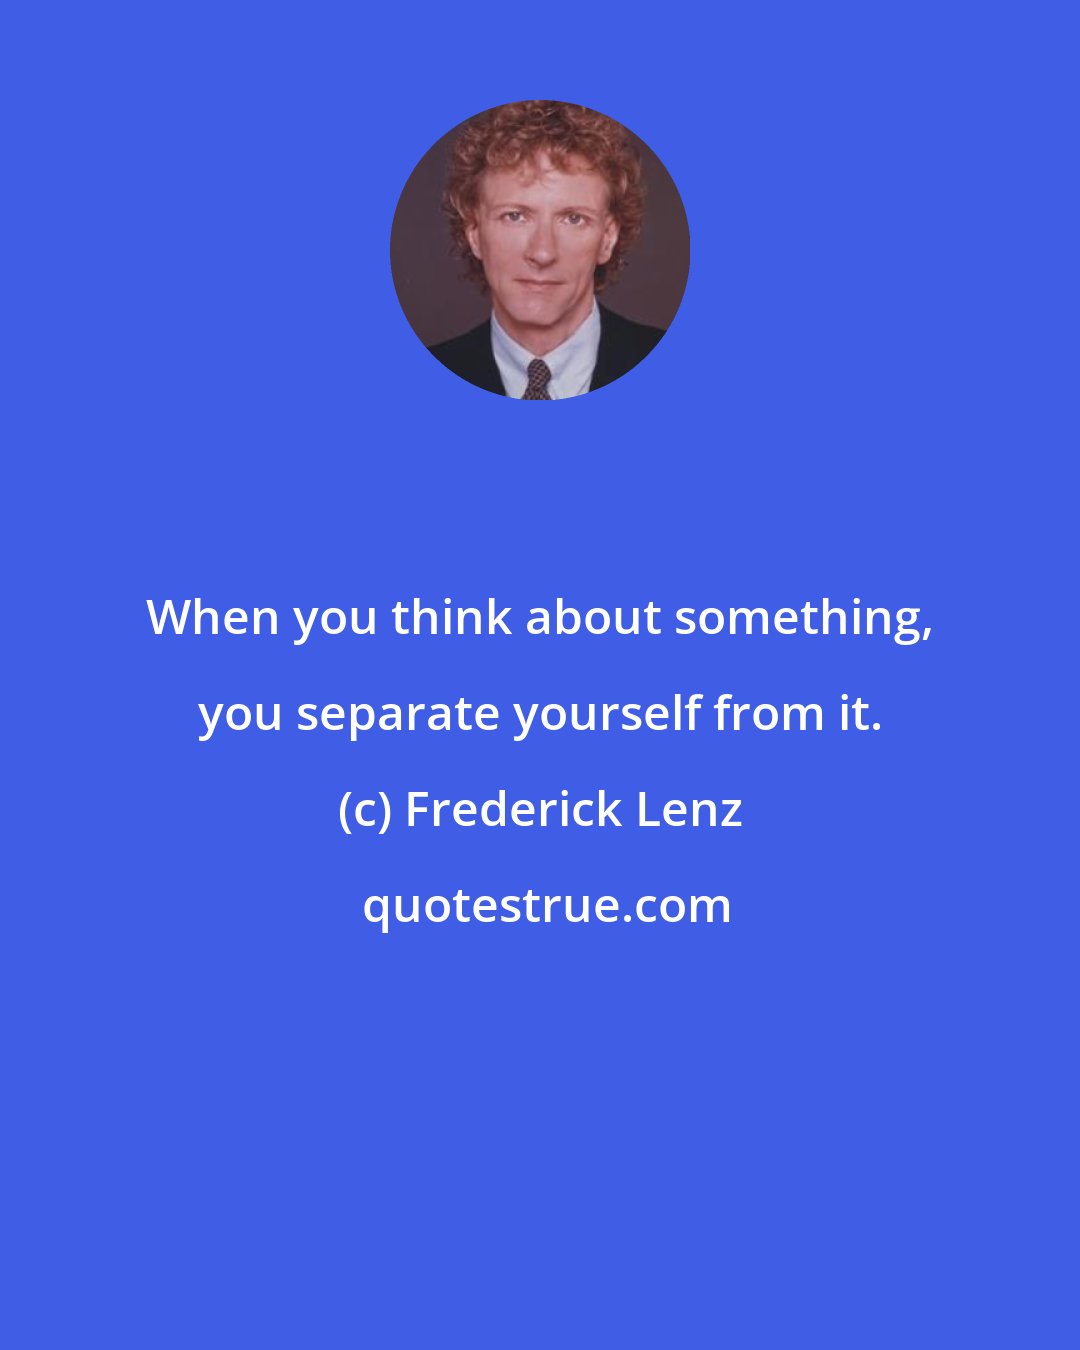 Frederick Lenz: When you think about something, you separate yourself from it.